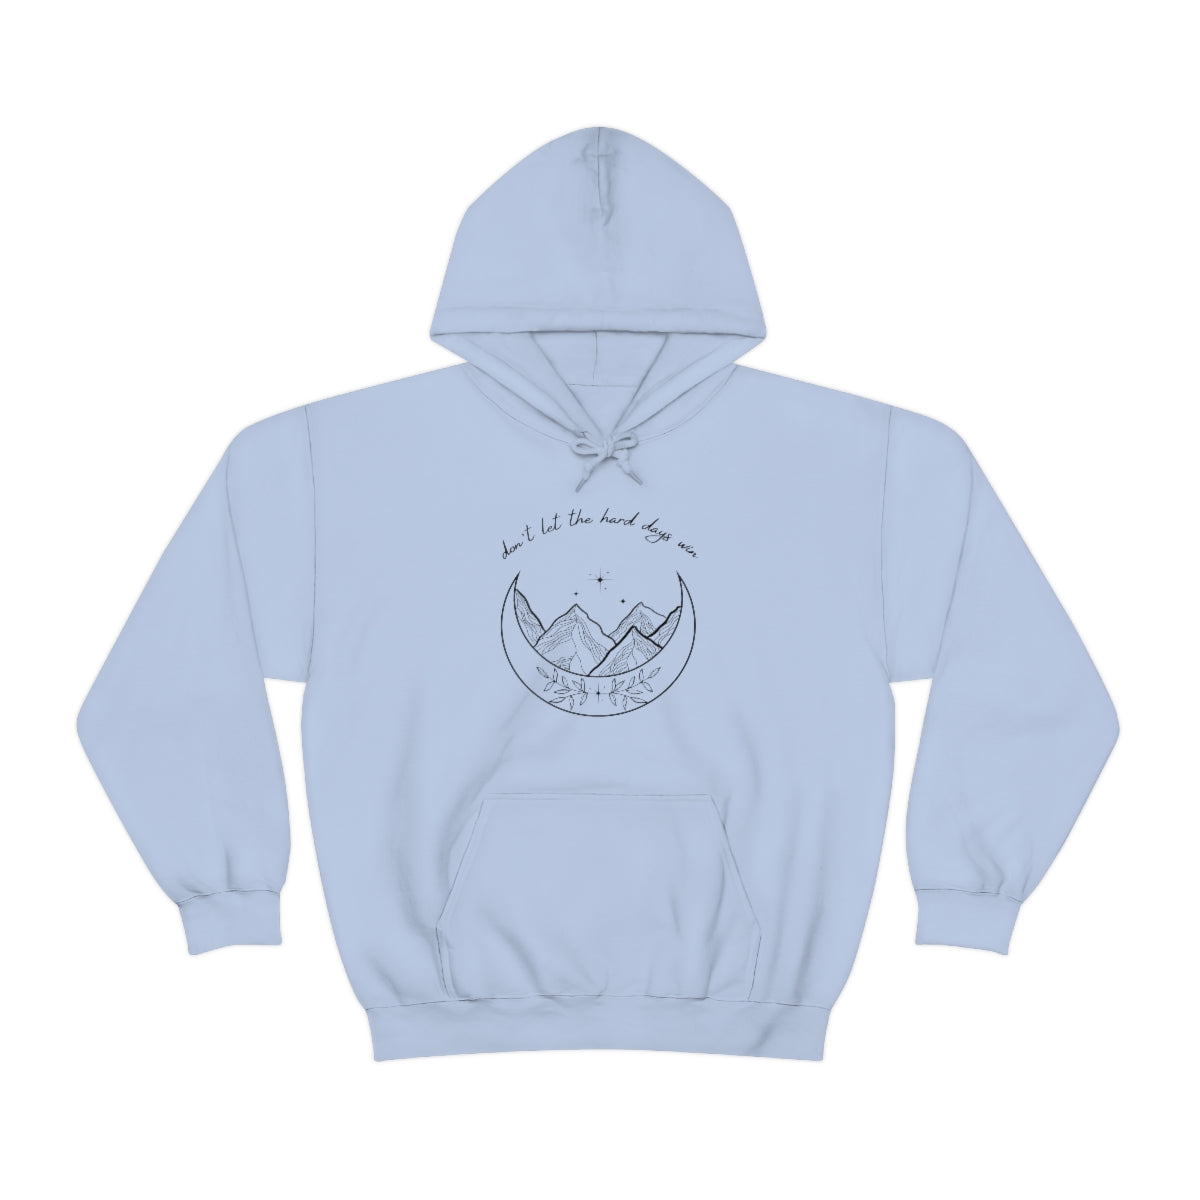 Don't let the hard days win Hooded Sweatshirt